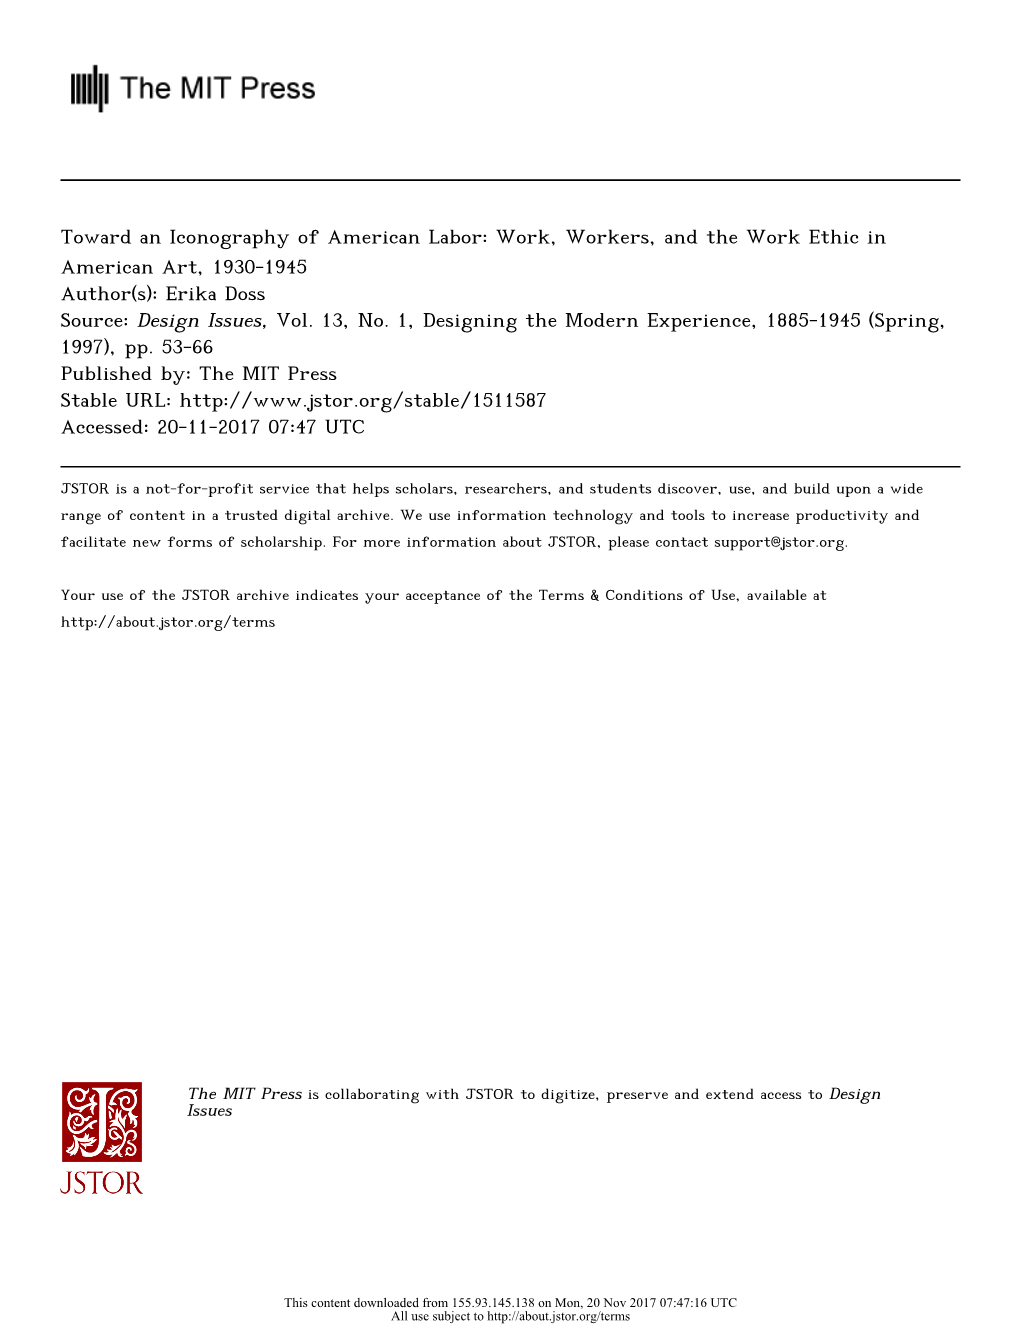 Toward an Iconography of American Labor: Work, Workers, and the Work Ethic in American Art, 1930-1945 Author(S): Erika Doss Source: Design Issues, Vol